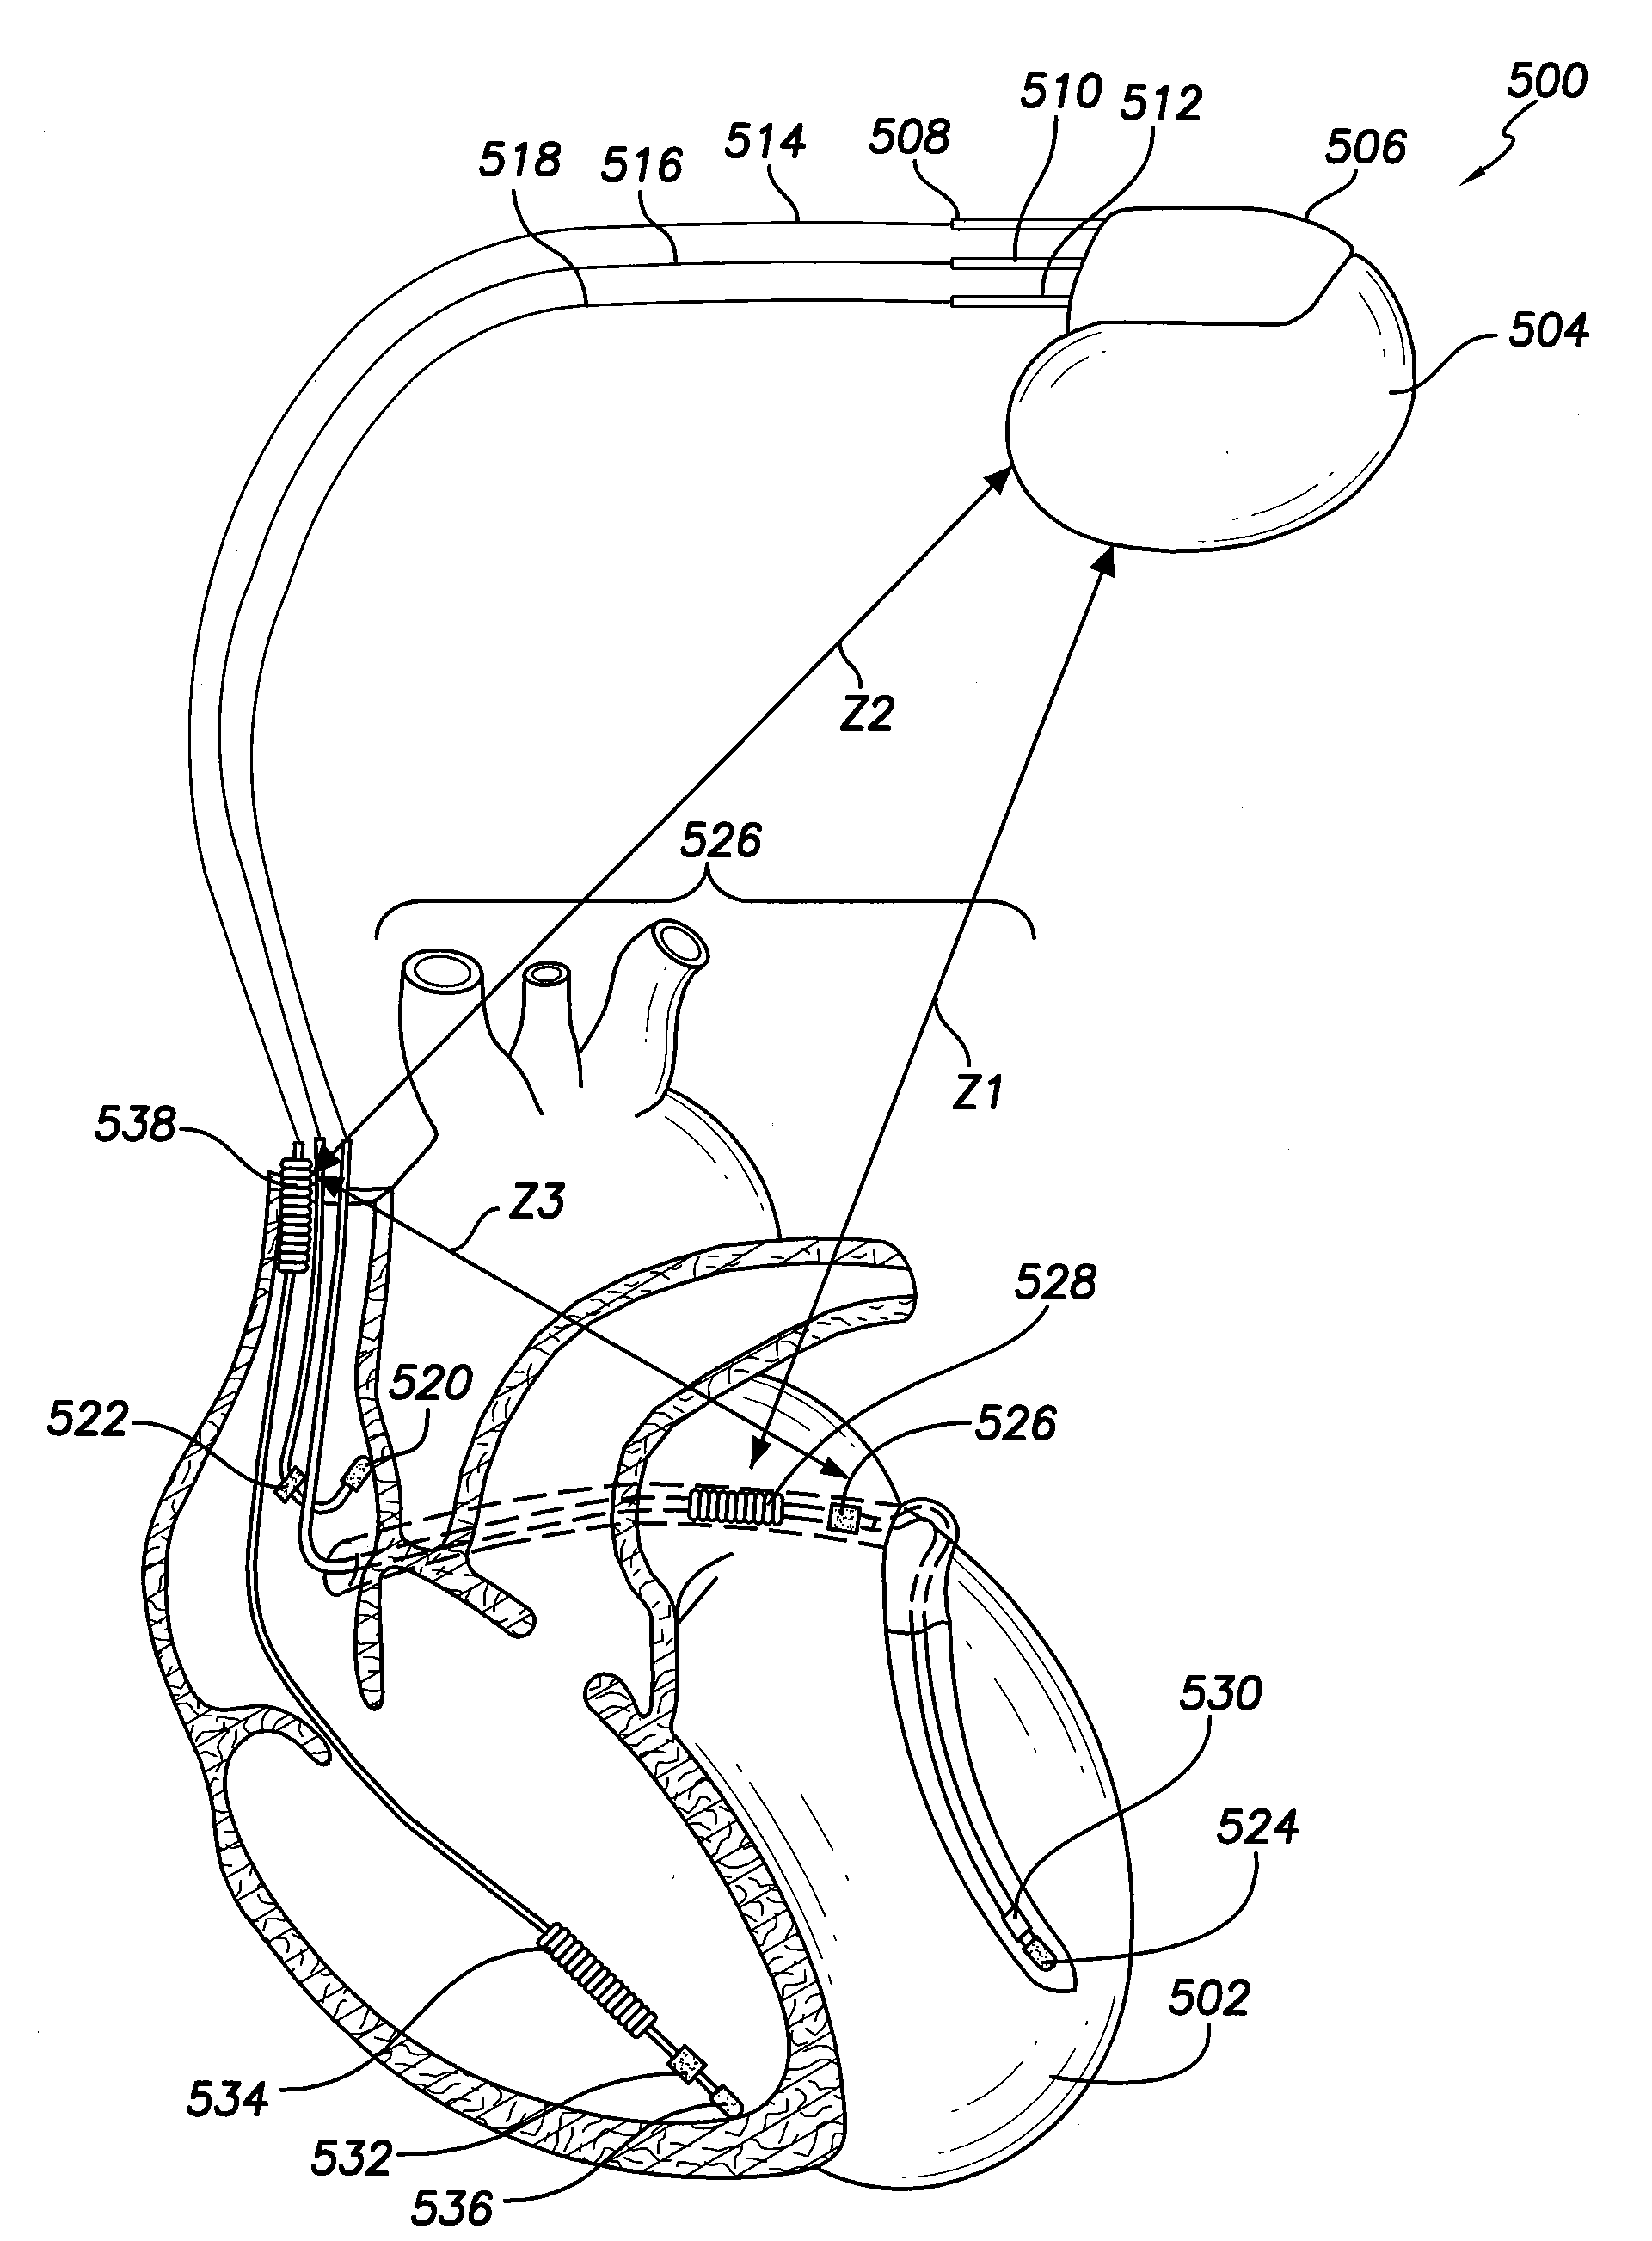 Method and system for discriminating and monitoring atrial arrhythmia based on cardiogenic impedance